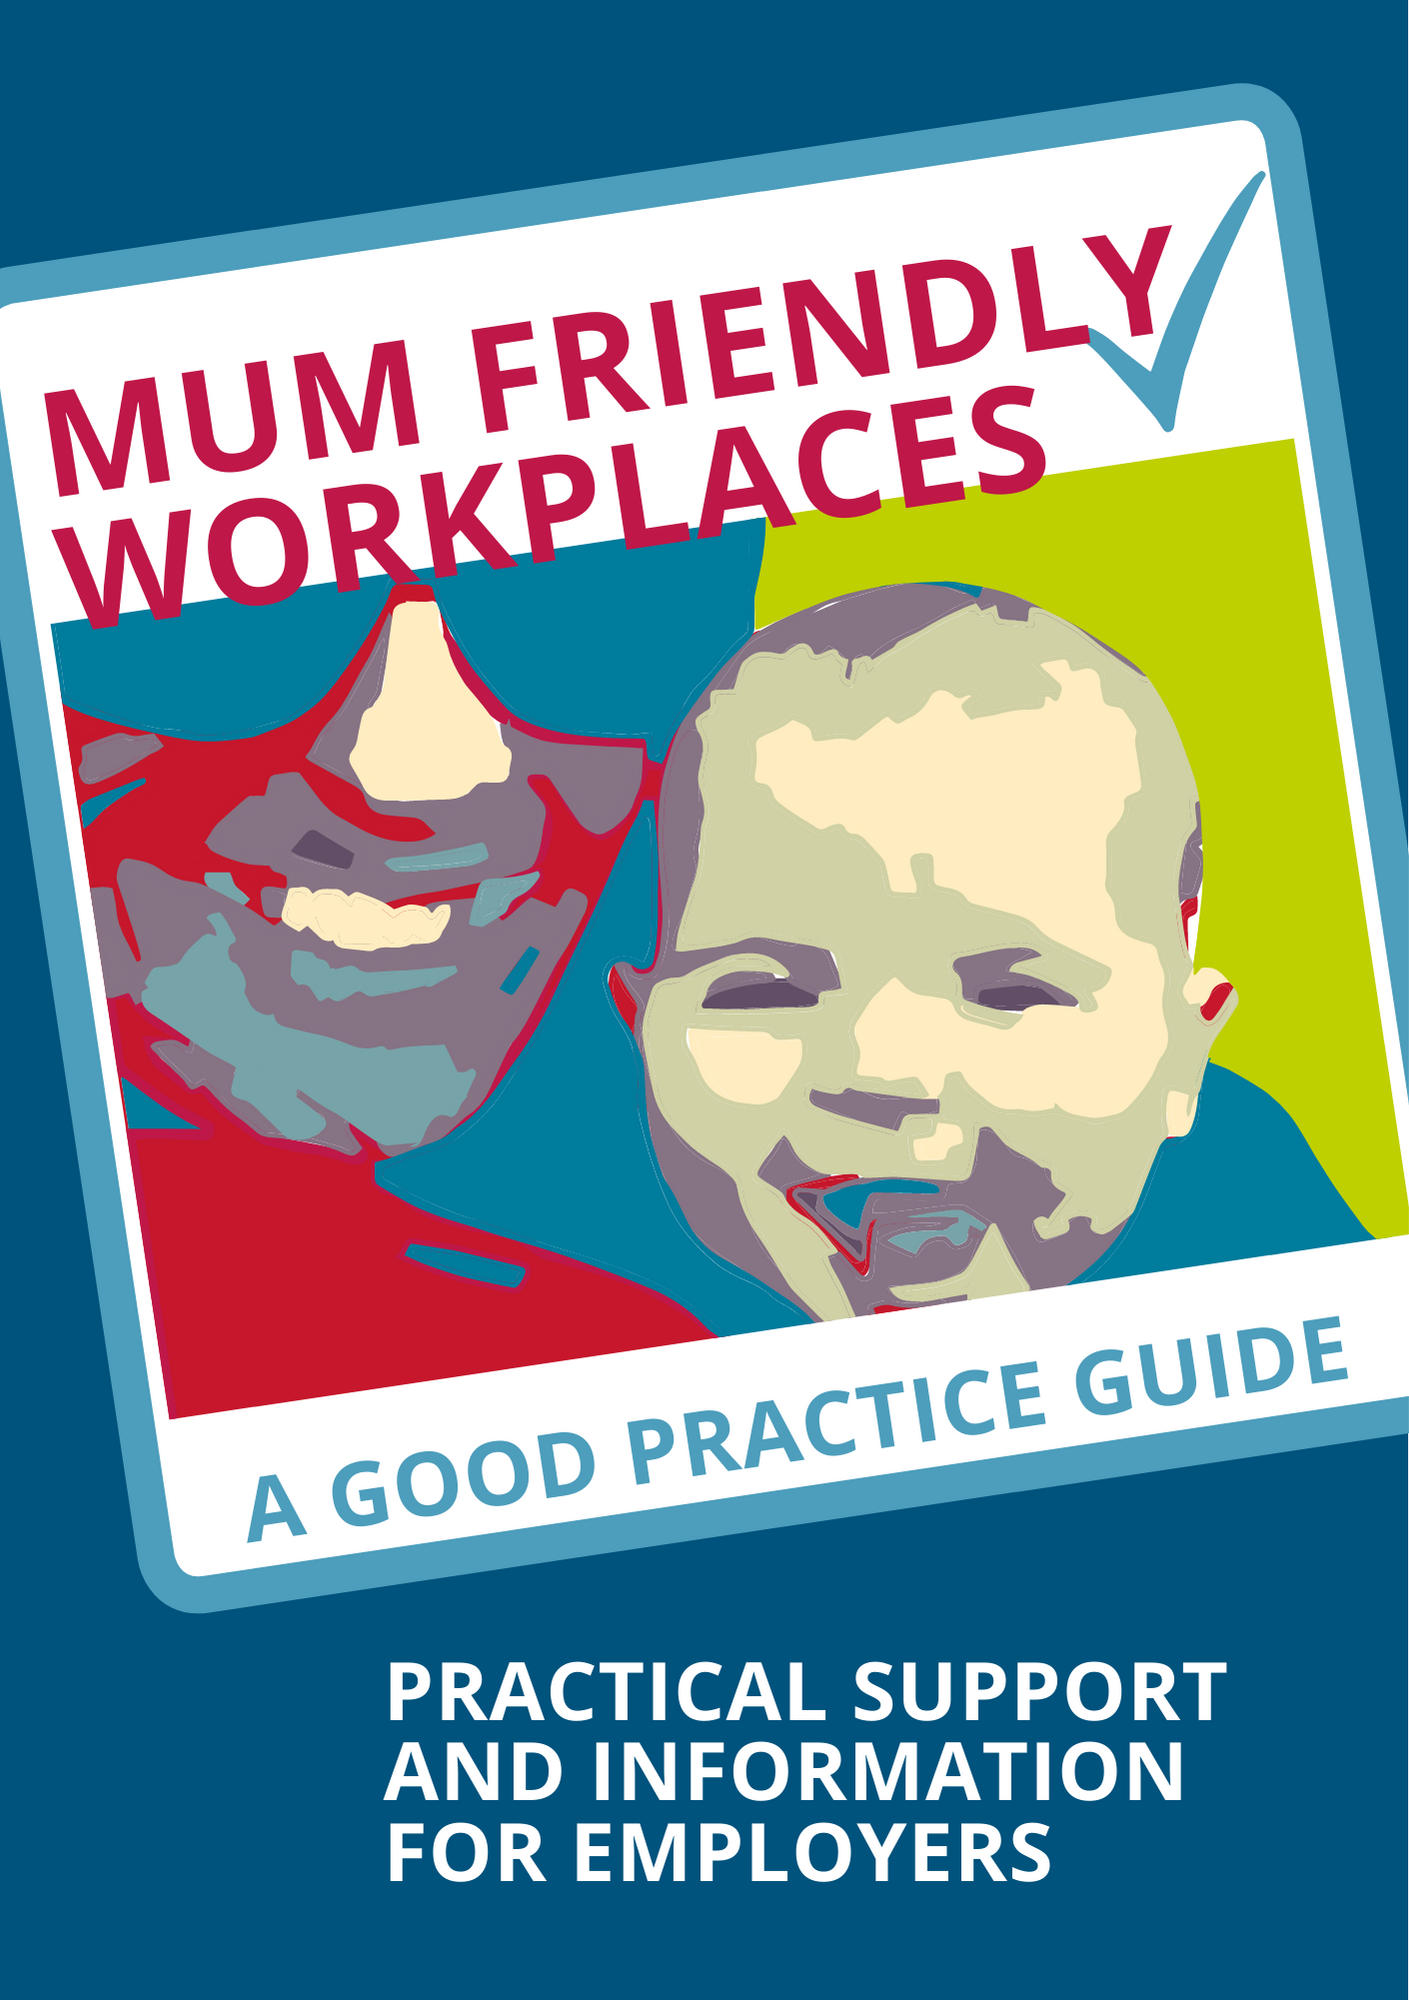 Mum friendly workplaces - a good practice guide. Practical support and information for employers.